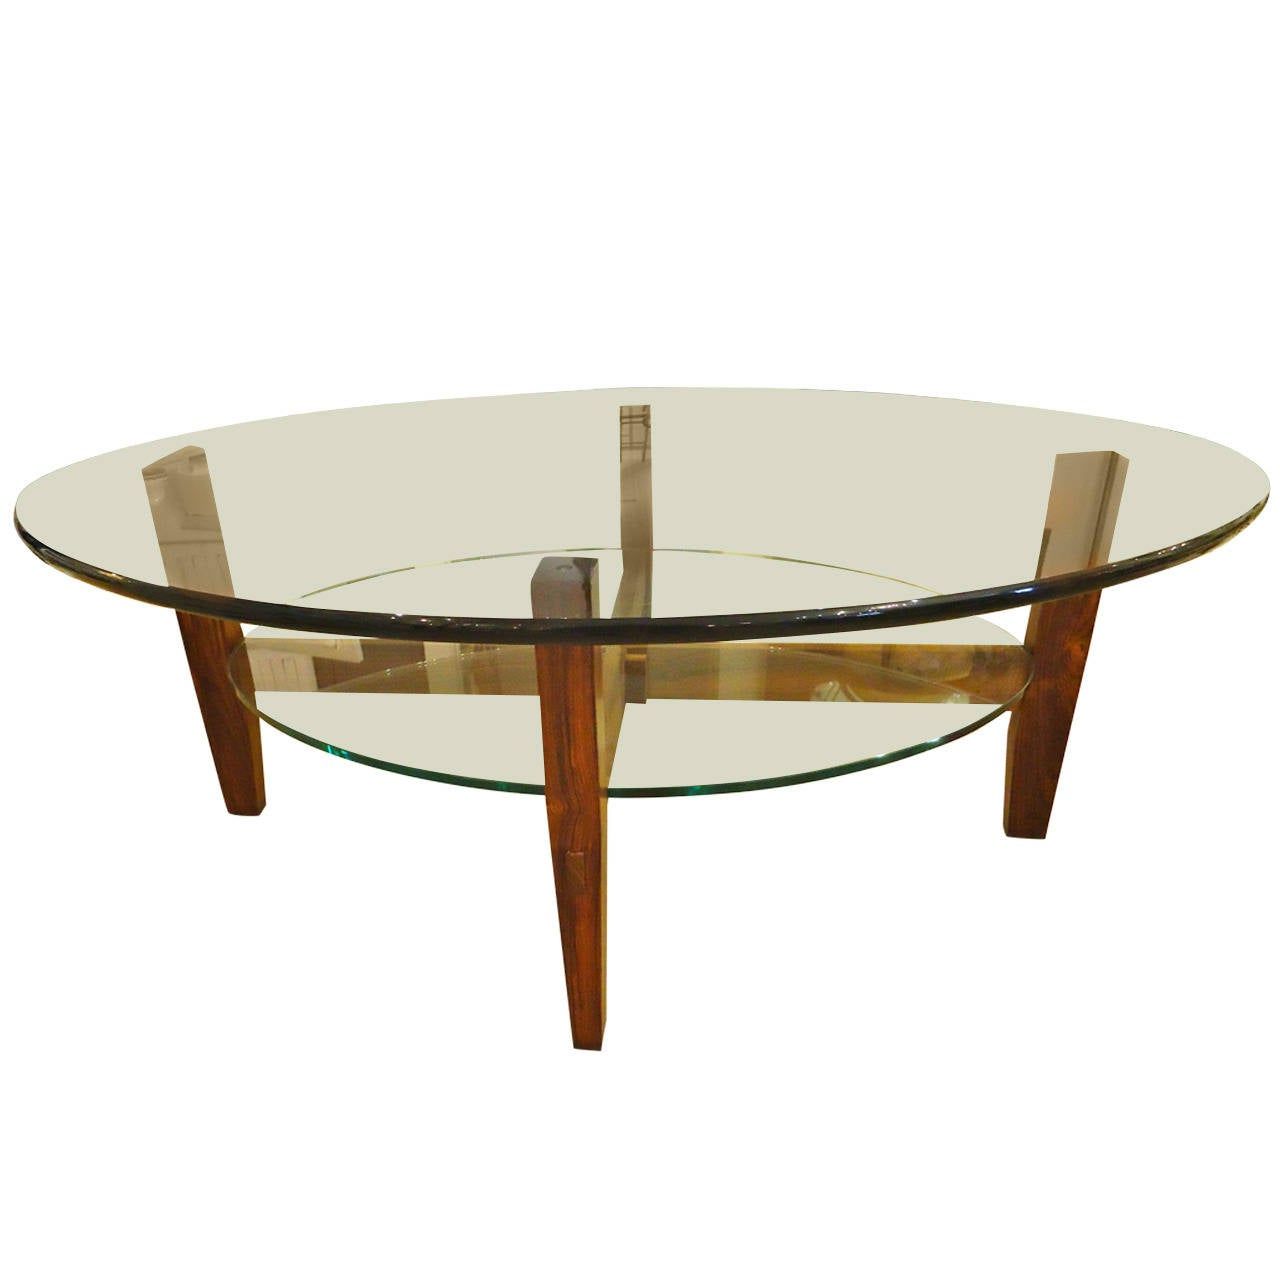 Two Tier Rosewood And Oval Glass Coffee Cocktail Table At For Fashionable Glass And Gold Oval Coffee Tables (View 14 of 20)